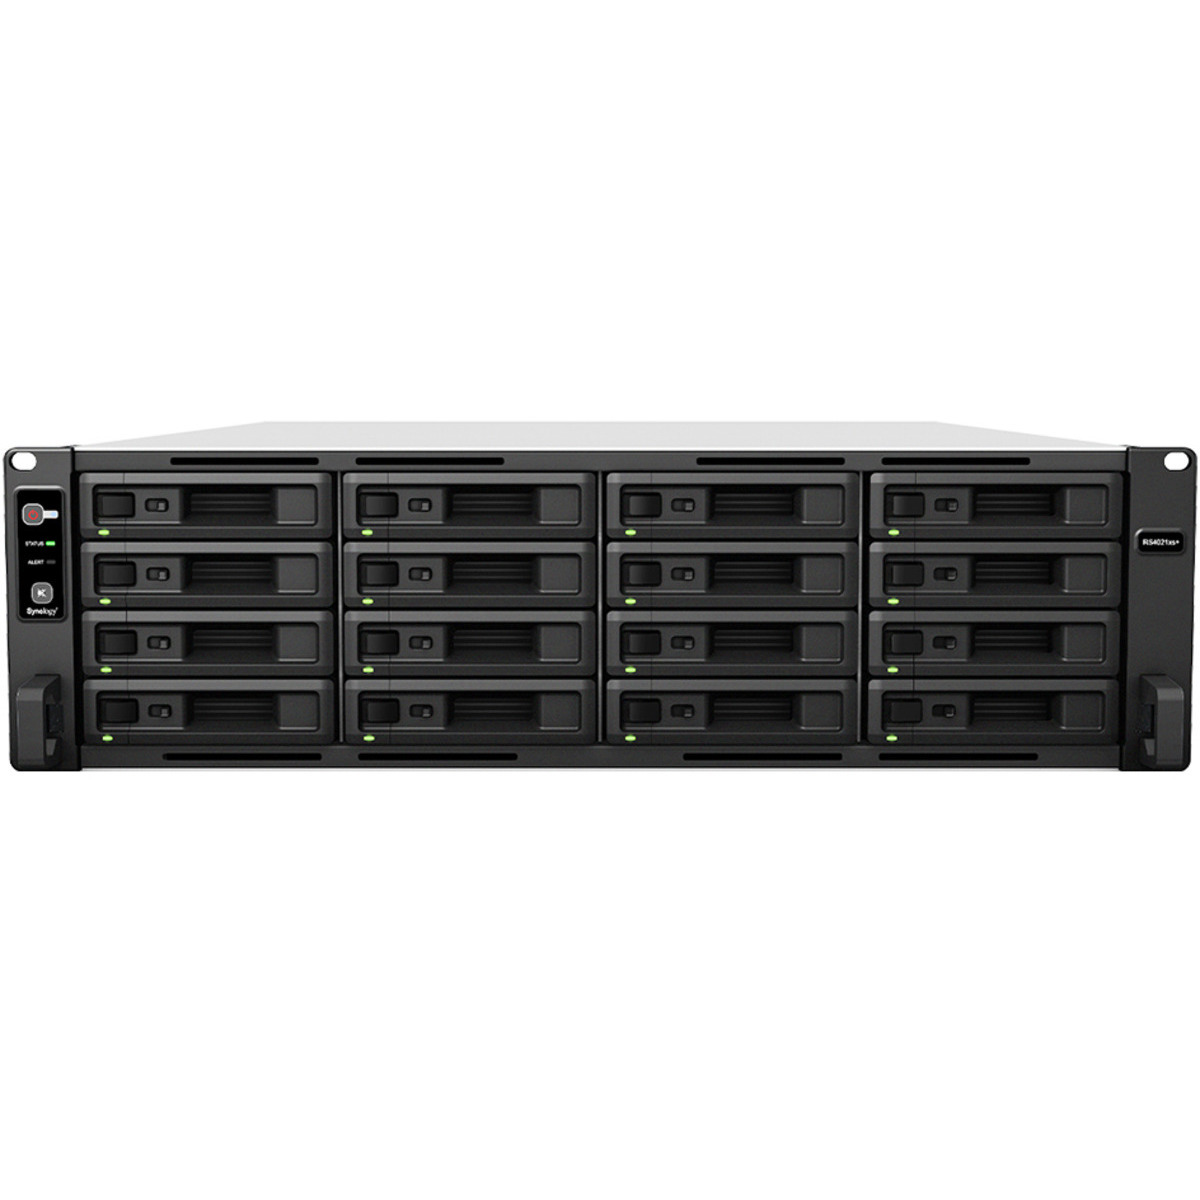 Synology RackStation RS4021xs+ 120tb 16-Bay RackMount Large Business / Enterprise NAS - Network Attached Storage Device 15x8tb Samsung 870 QVO MZ-77Q8T0 2.5 560/530MB/s SATA 6Gb/s SSD CONSUMER Class Drives Installed - Burn-In Tested RackStation RS4021xs+